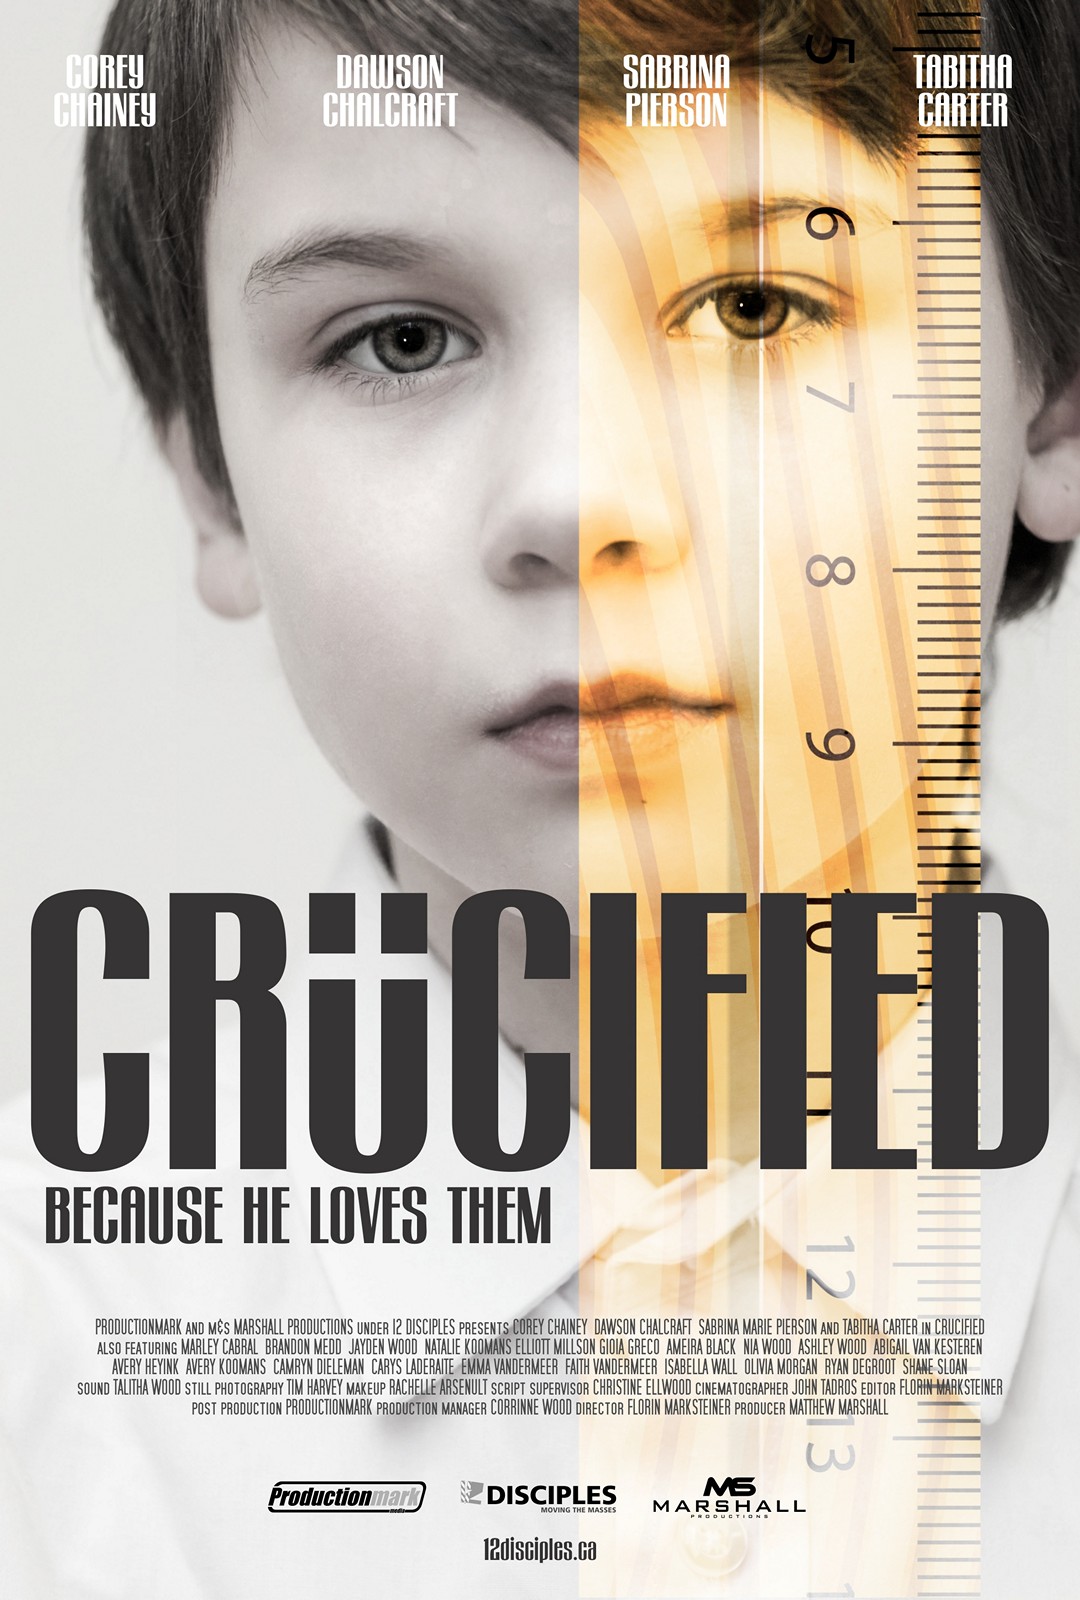 Productionmark-Services-Film-Poster-Design-Short-Film-Crucified